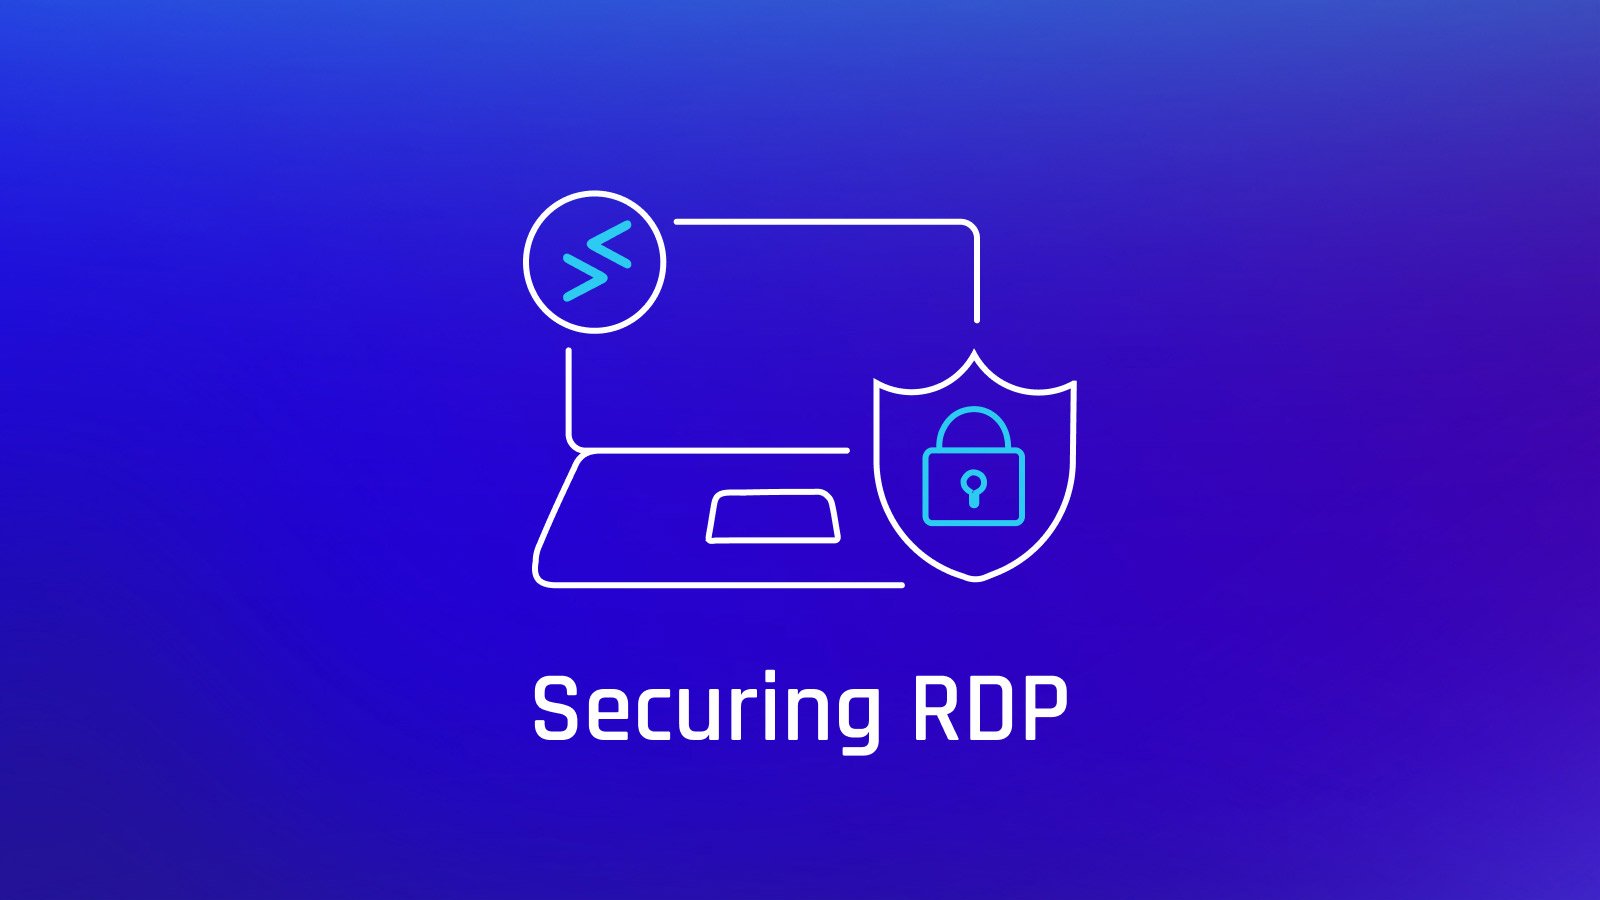 How to Secure RDP (Remote Desktop Protocol)